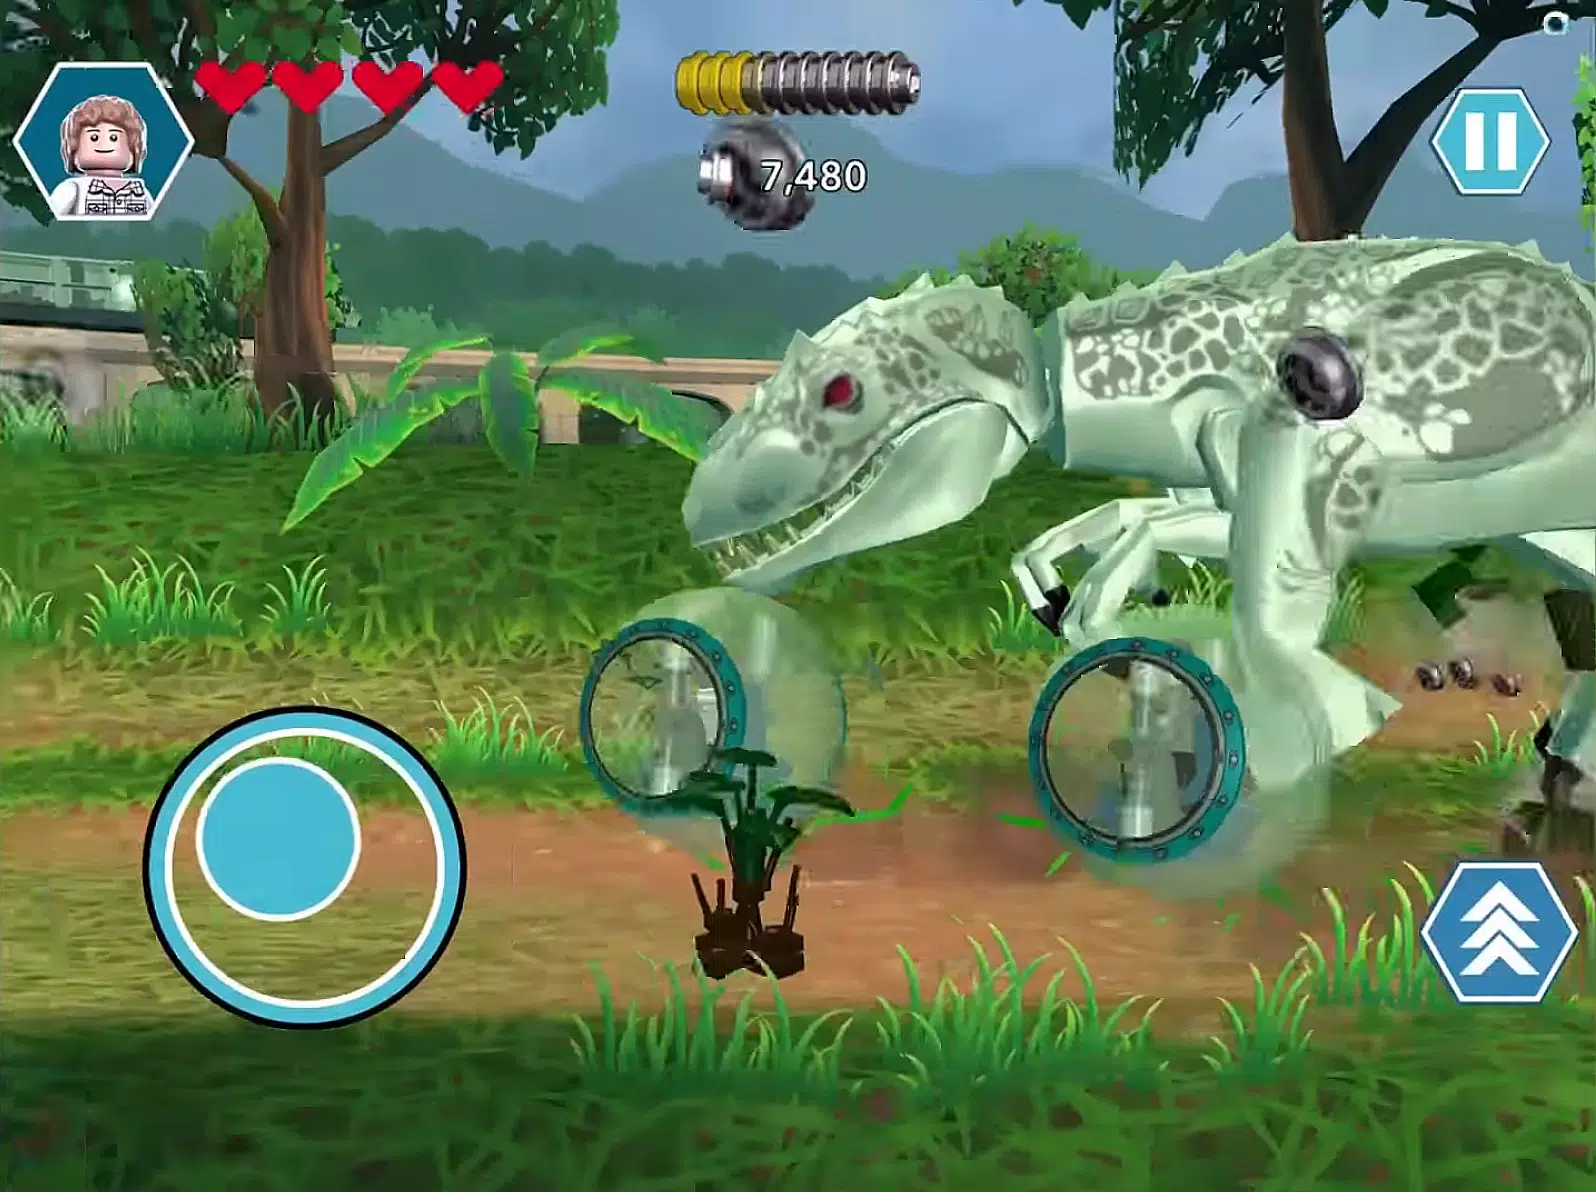 Guidebook LEGO Jurassic World for Android - APK Download